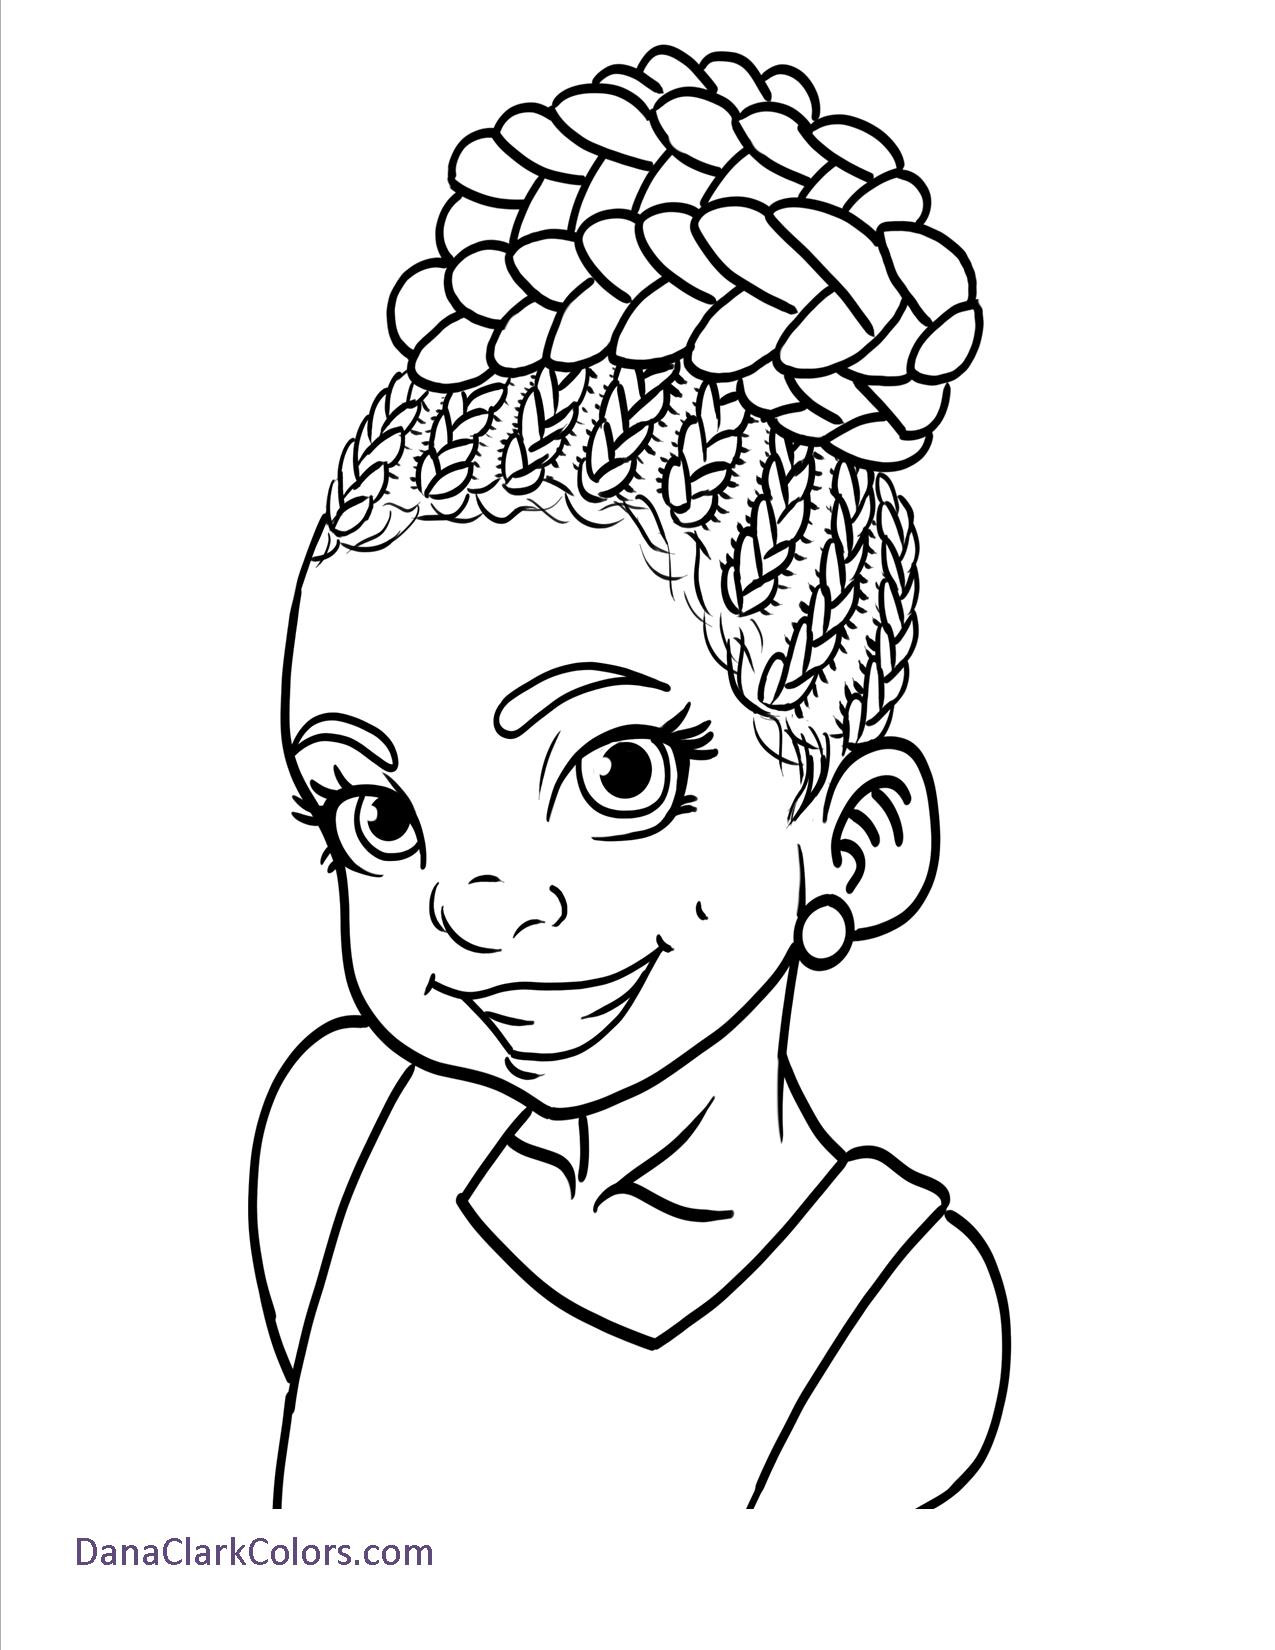 Black Girl Coloring Pages
 Free Coloring Pages DanaClarkColors